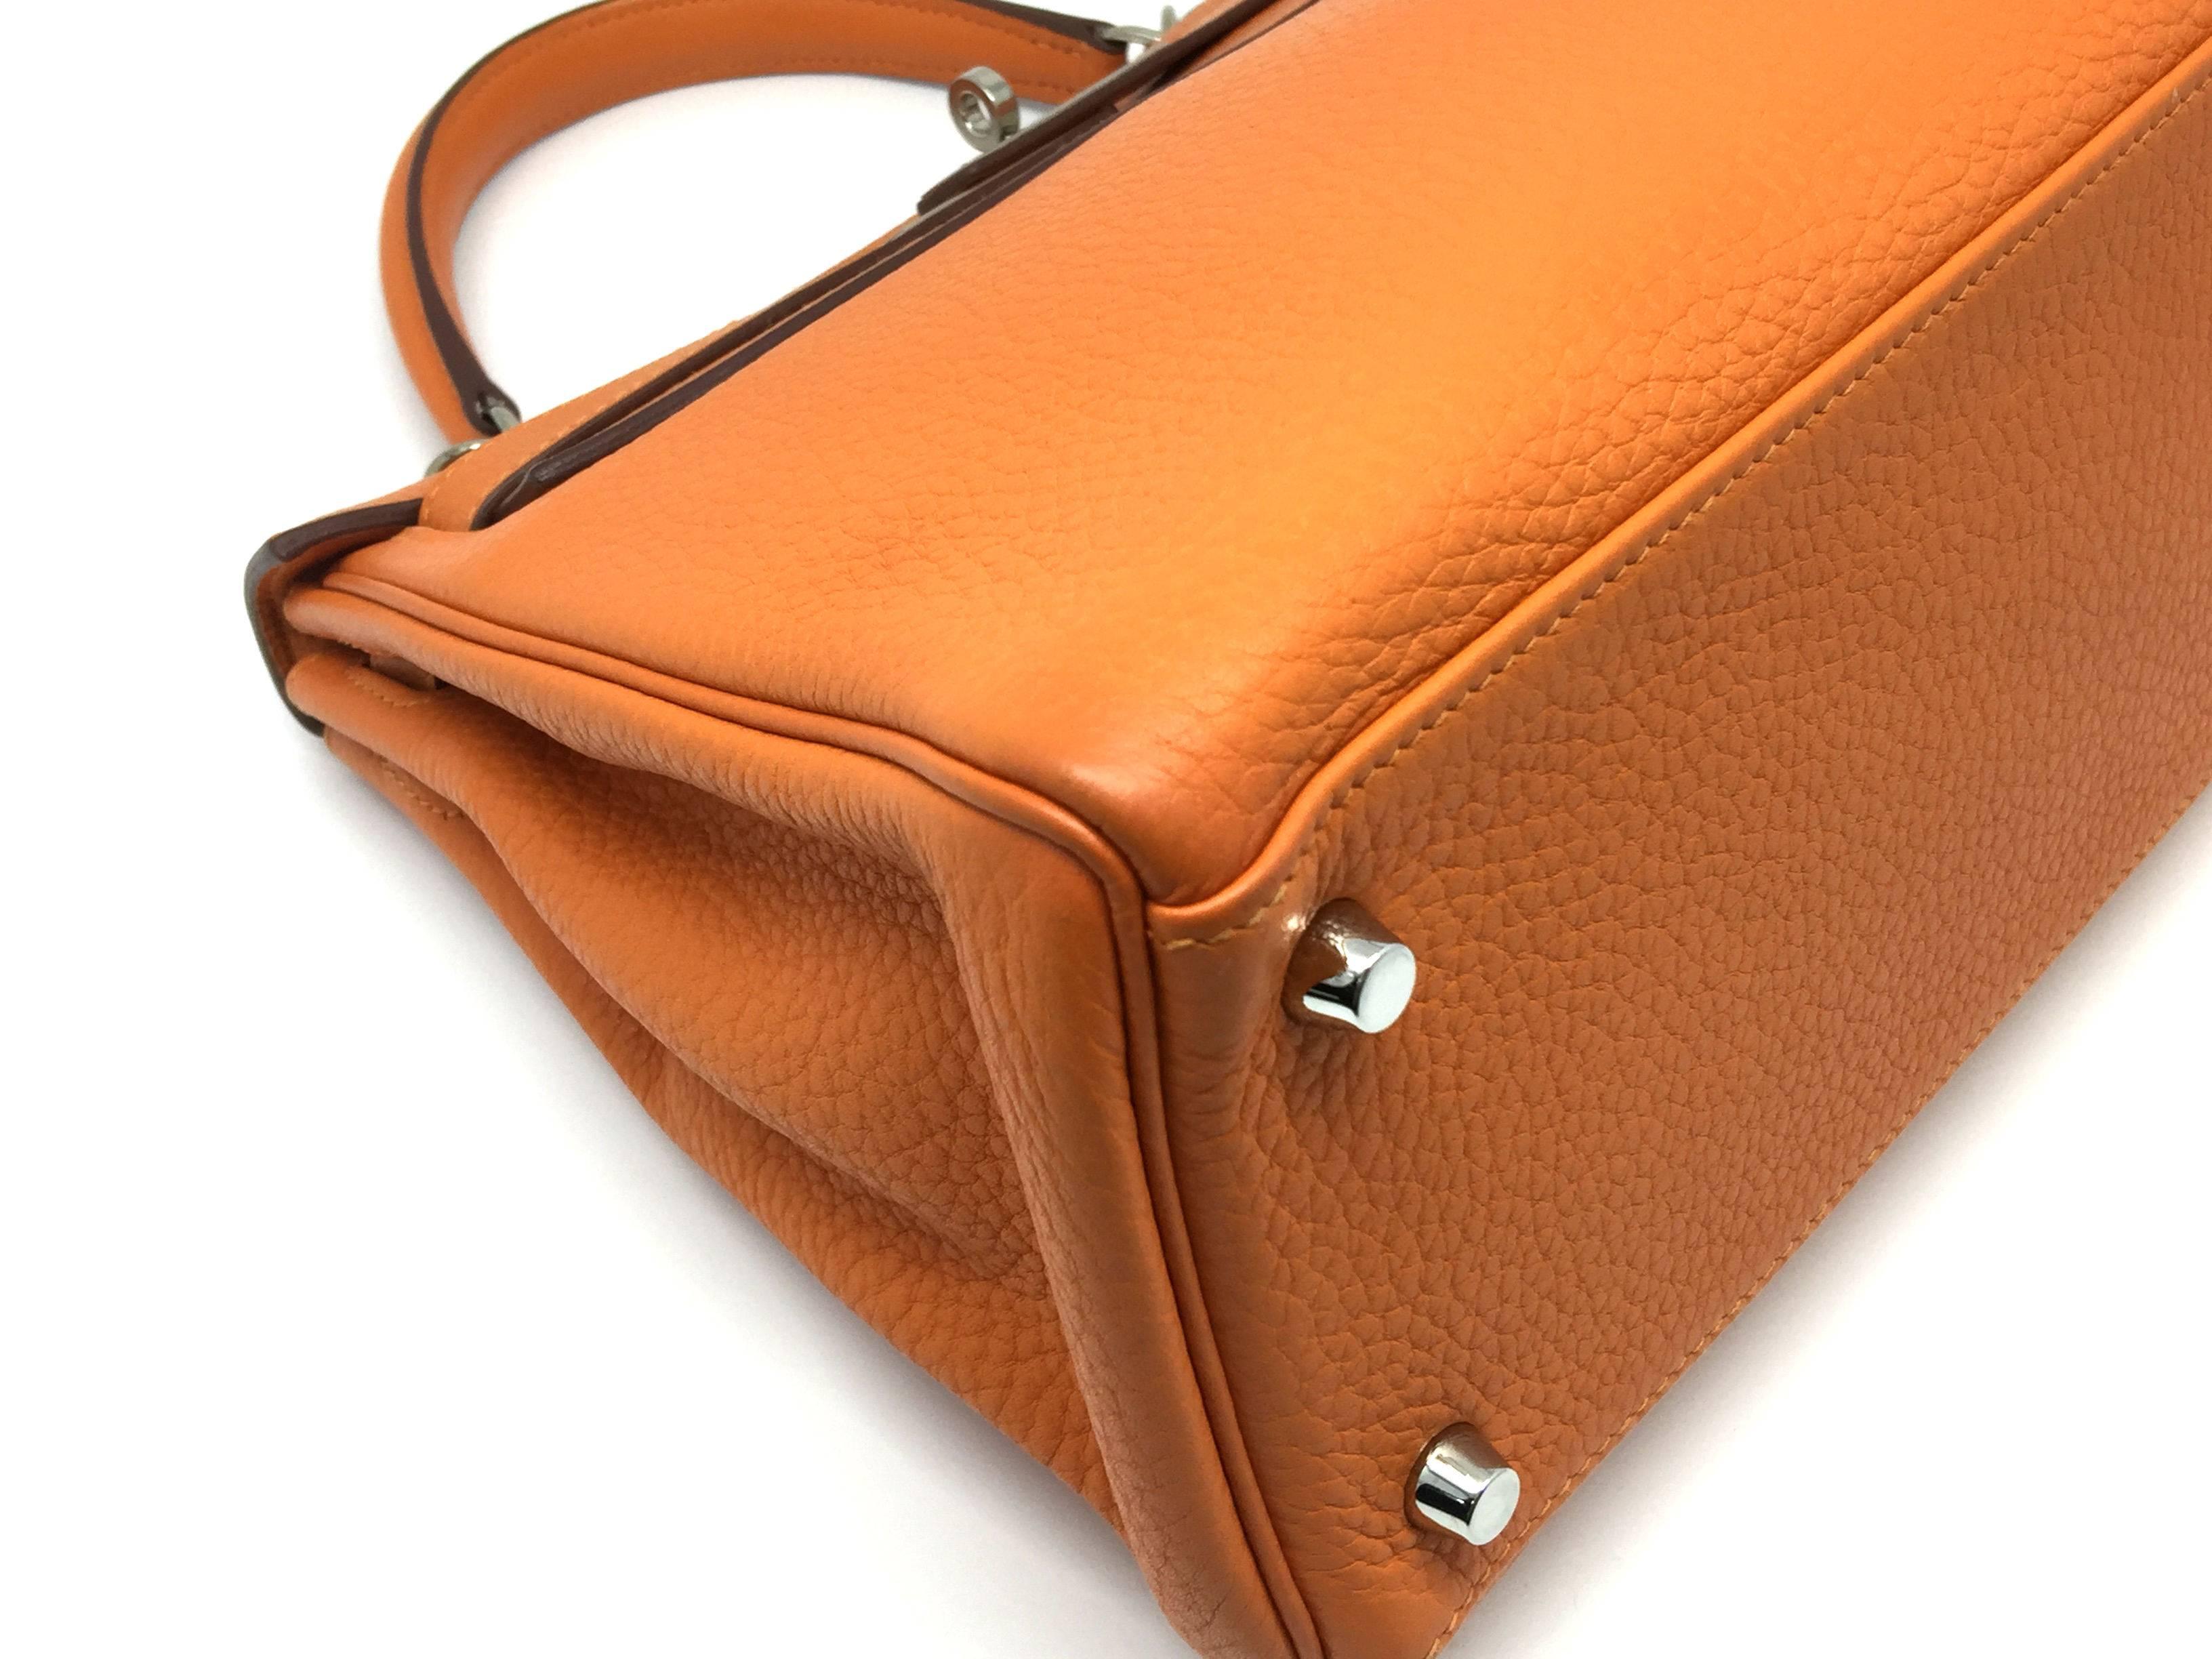 Hermes Kelly 32 Orange Iris Clemence Leather SHW Top Handle Bag For Sale 6